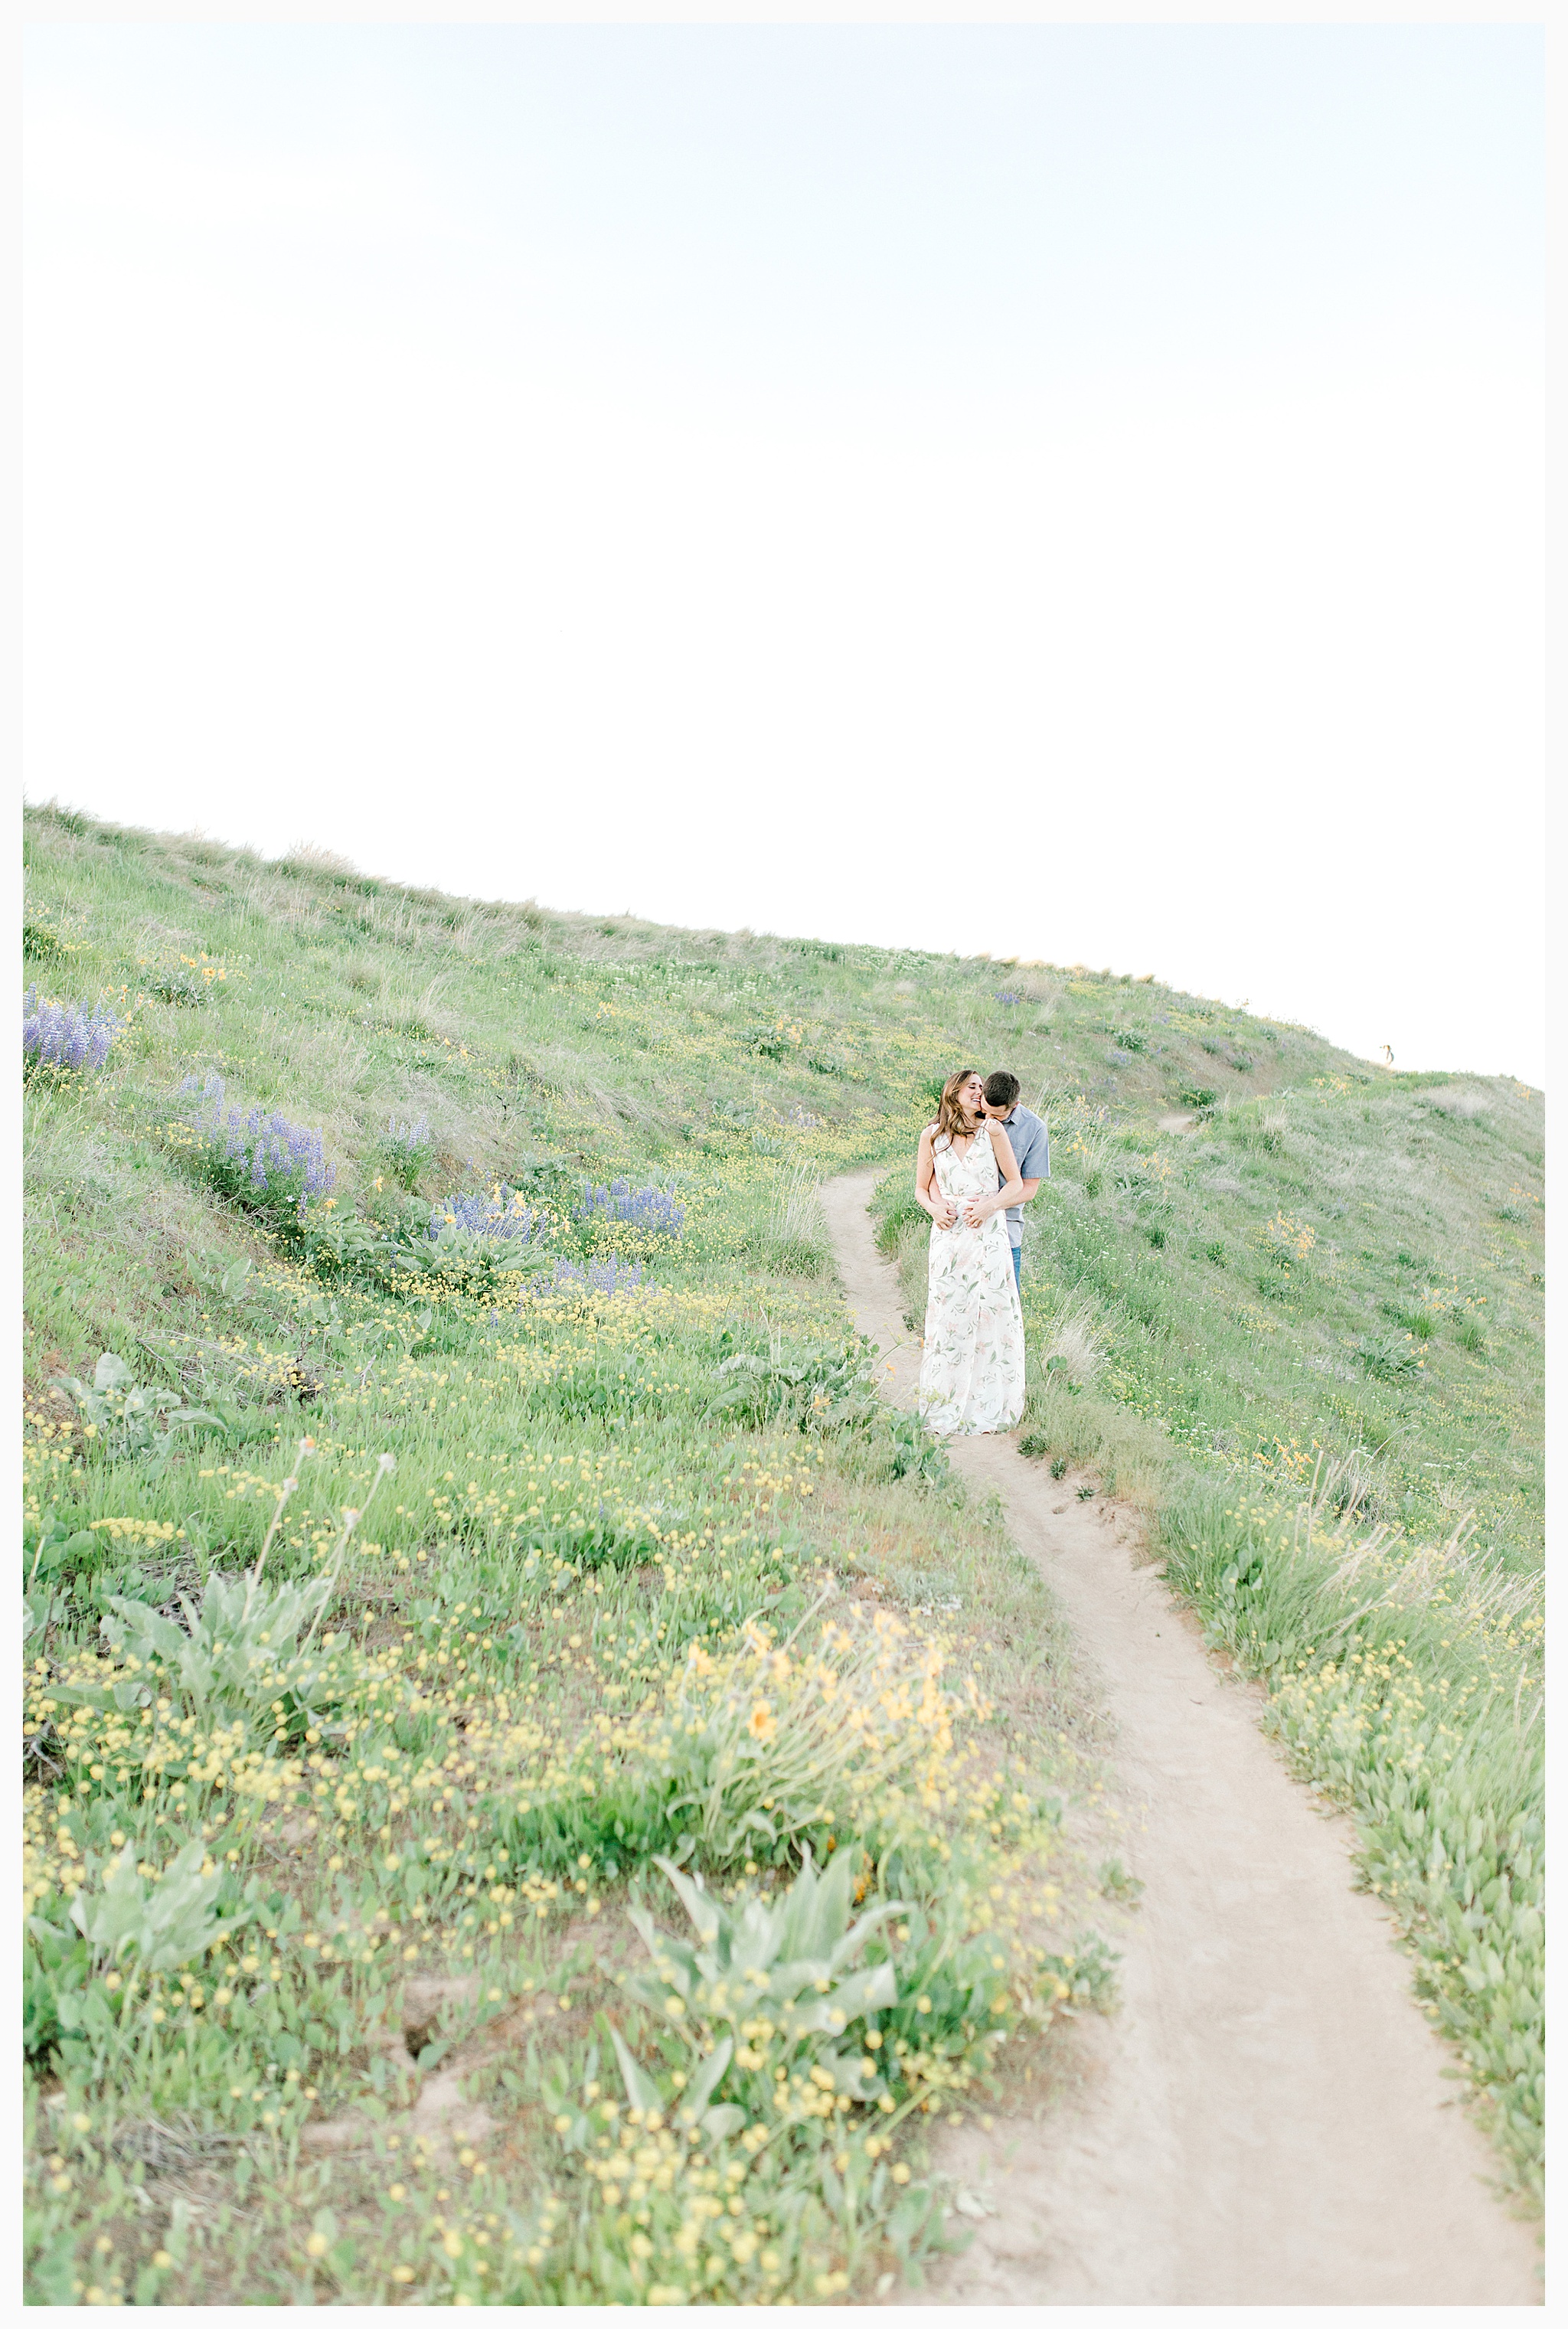 Engagement session amongst the wildflowers in Wenatchee, Washington | Engagement Session Outfit Inspiration for Wedding Photography with Emma Rose Company | Light and Airy PNW Photographer, Seattle Bride_0006.jpg